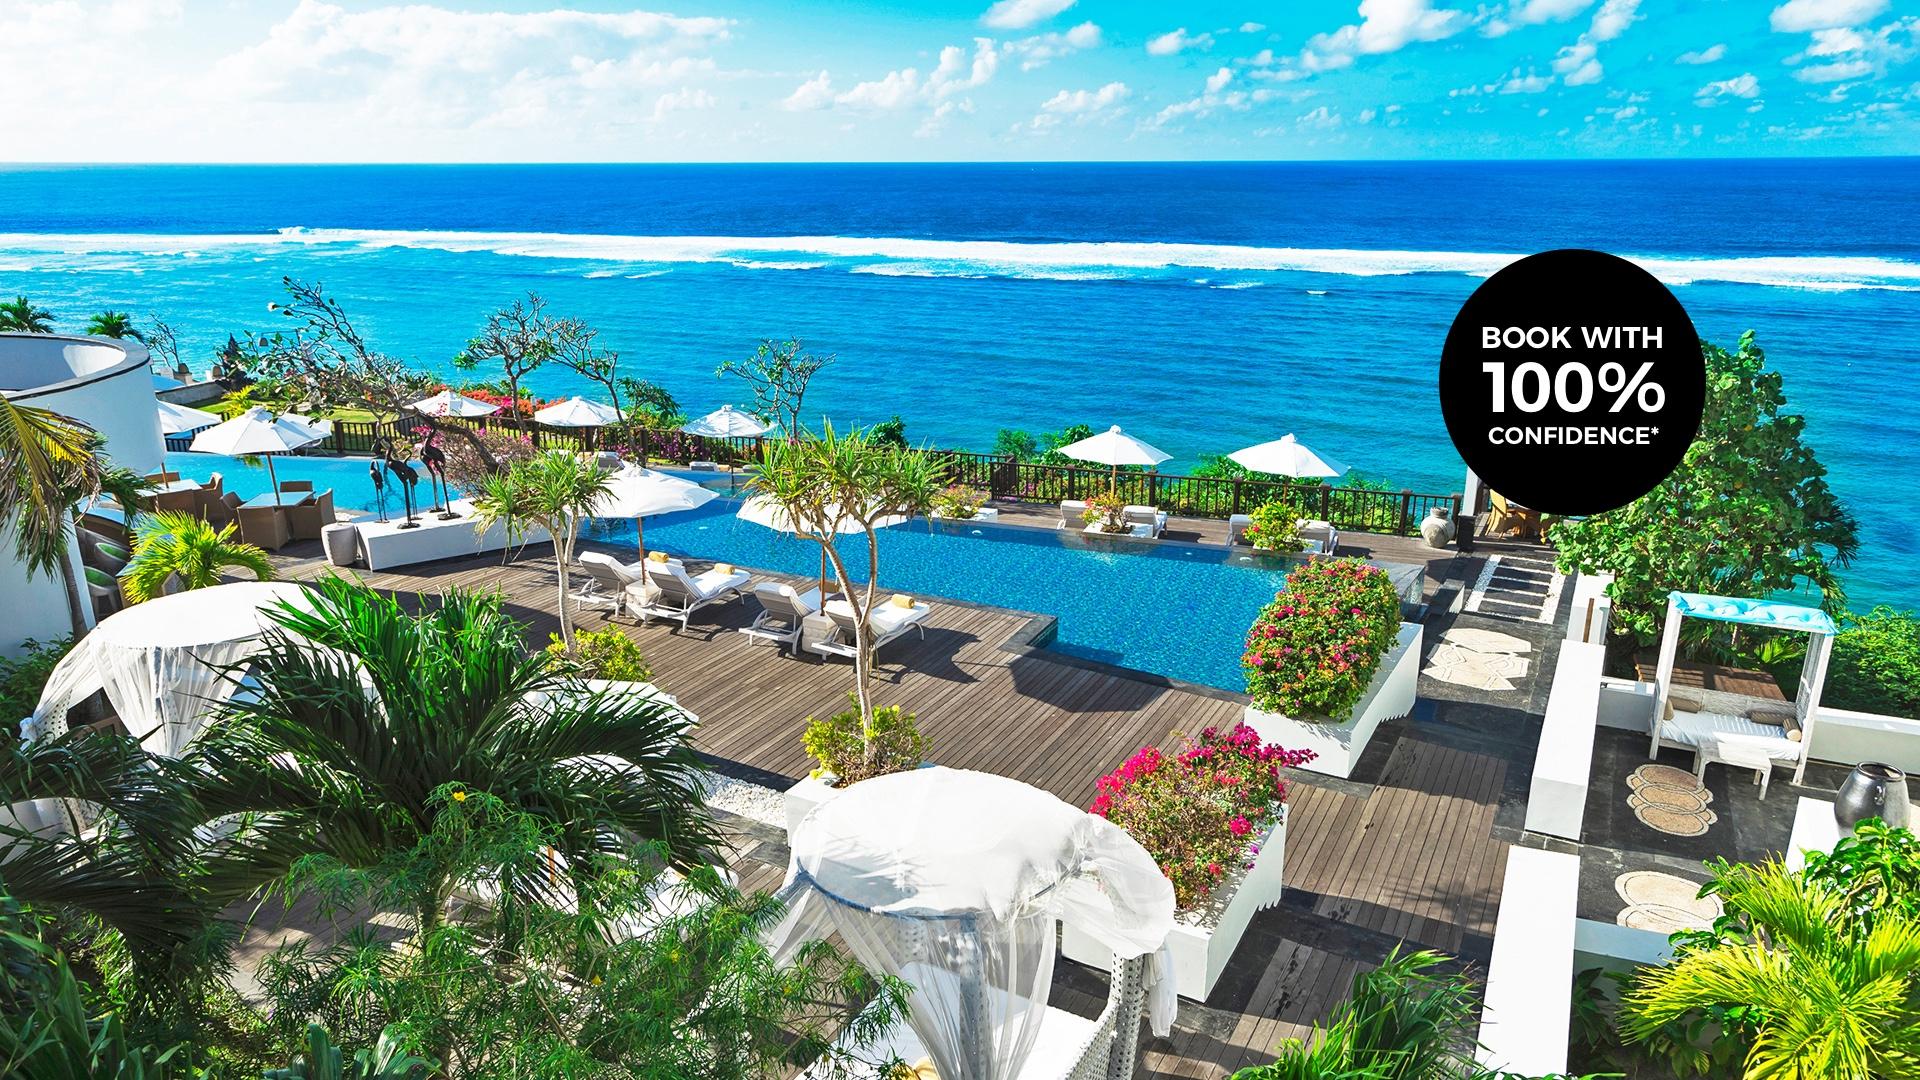 Bali Holiday Packages 2021/2022: Hotel + Flight Deals - Luxury Escapes AU